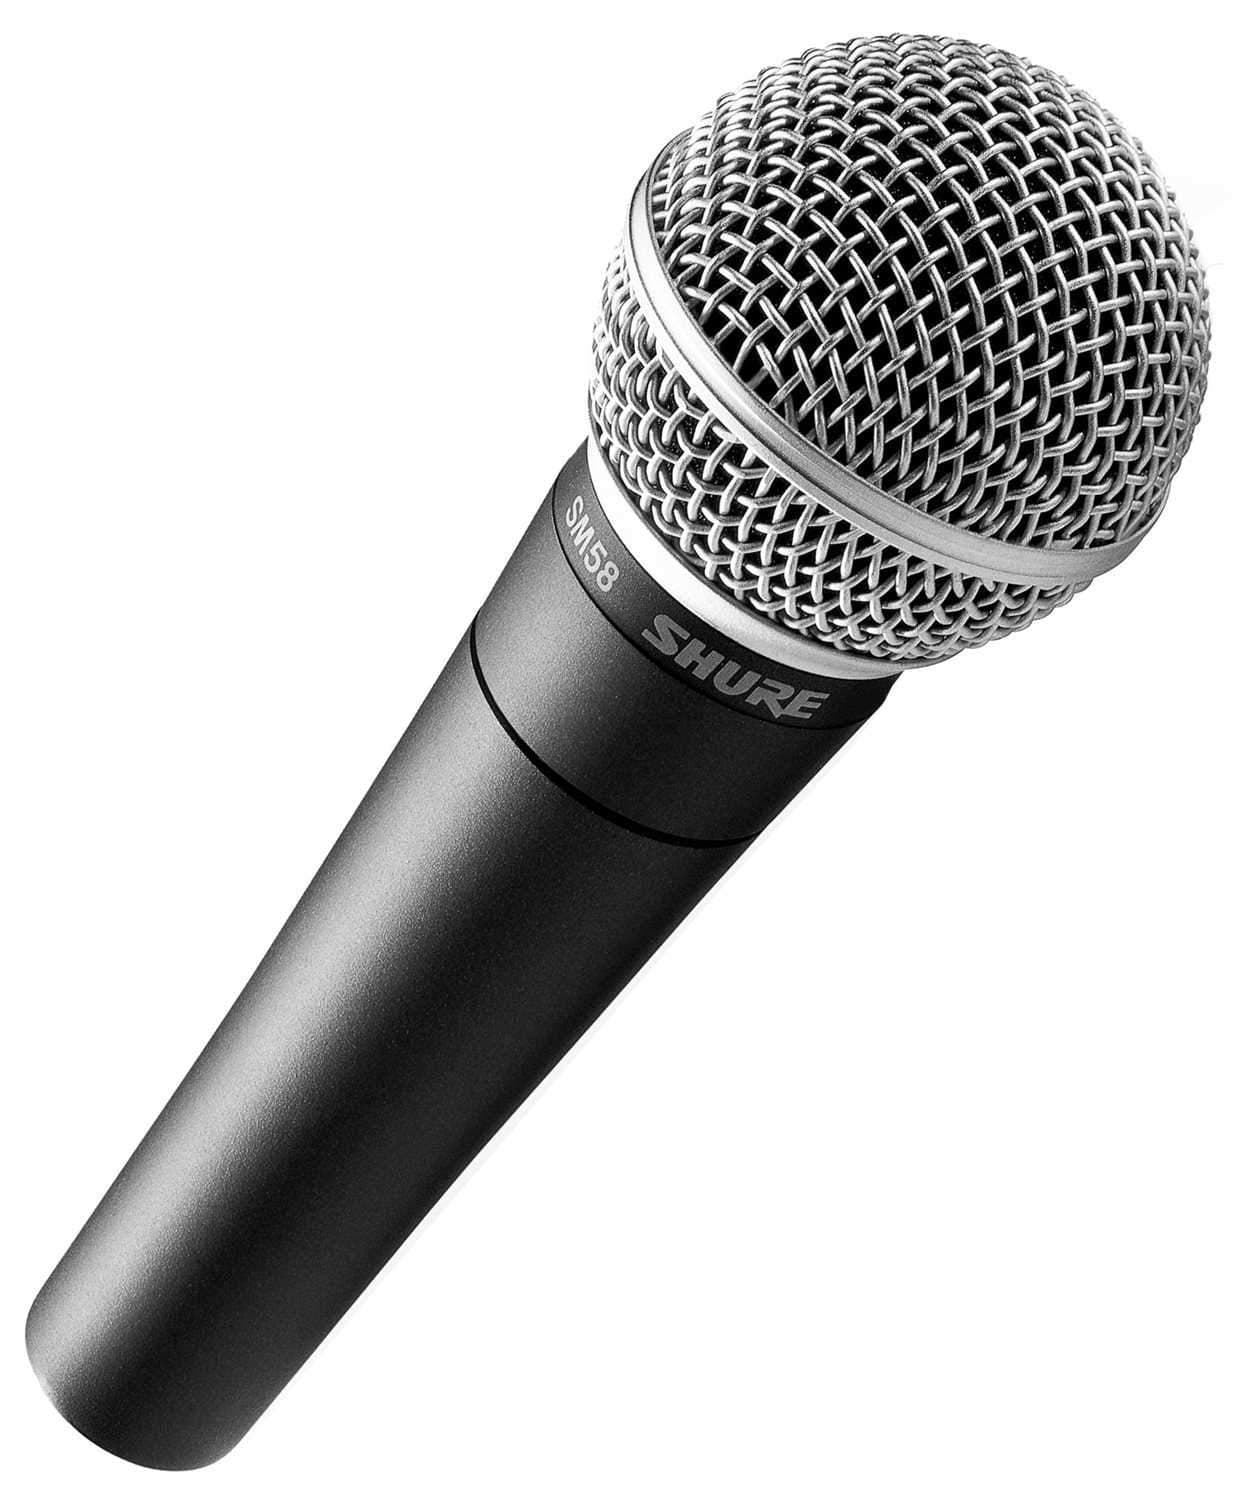 Shure SM58 Cardioid Dynamic Vocal Microphone - PSSL ProSound and Stage Lighting